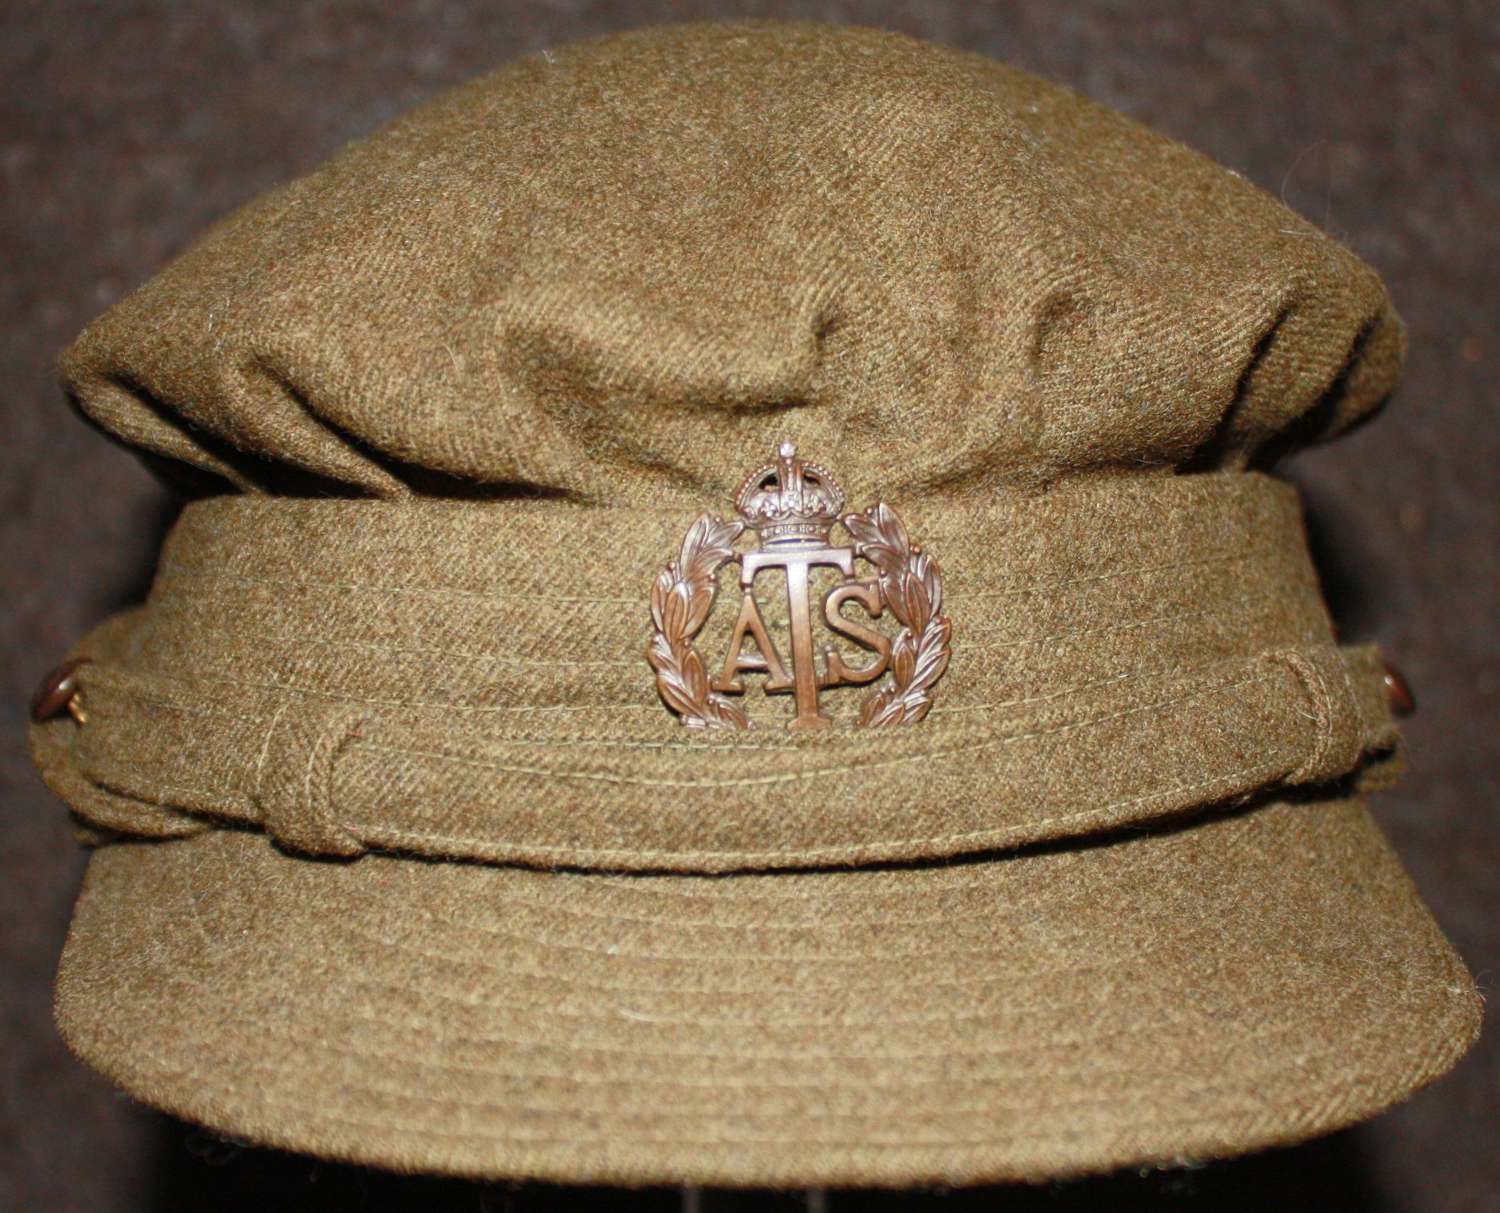 A VERY NICE EARLY WWII NAMED ATS OFFICERS CAP